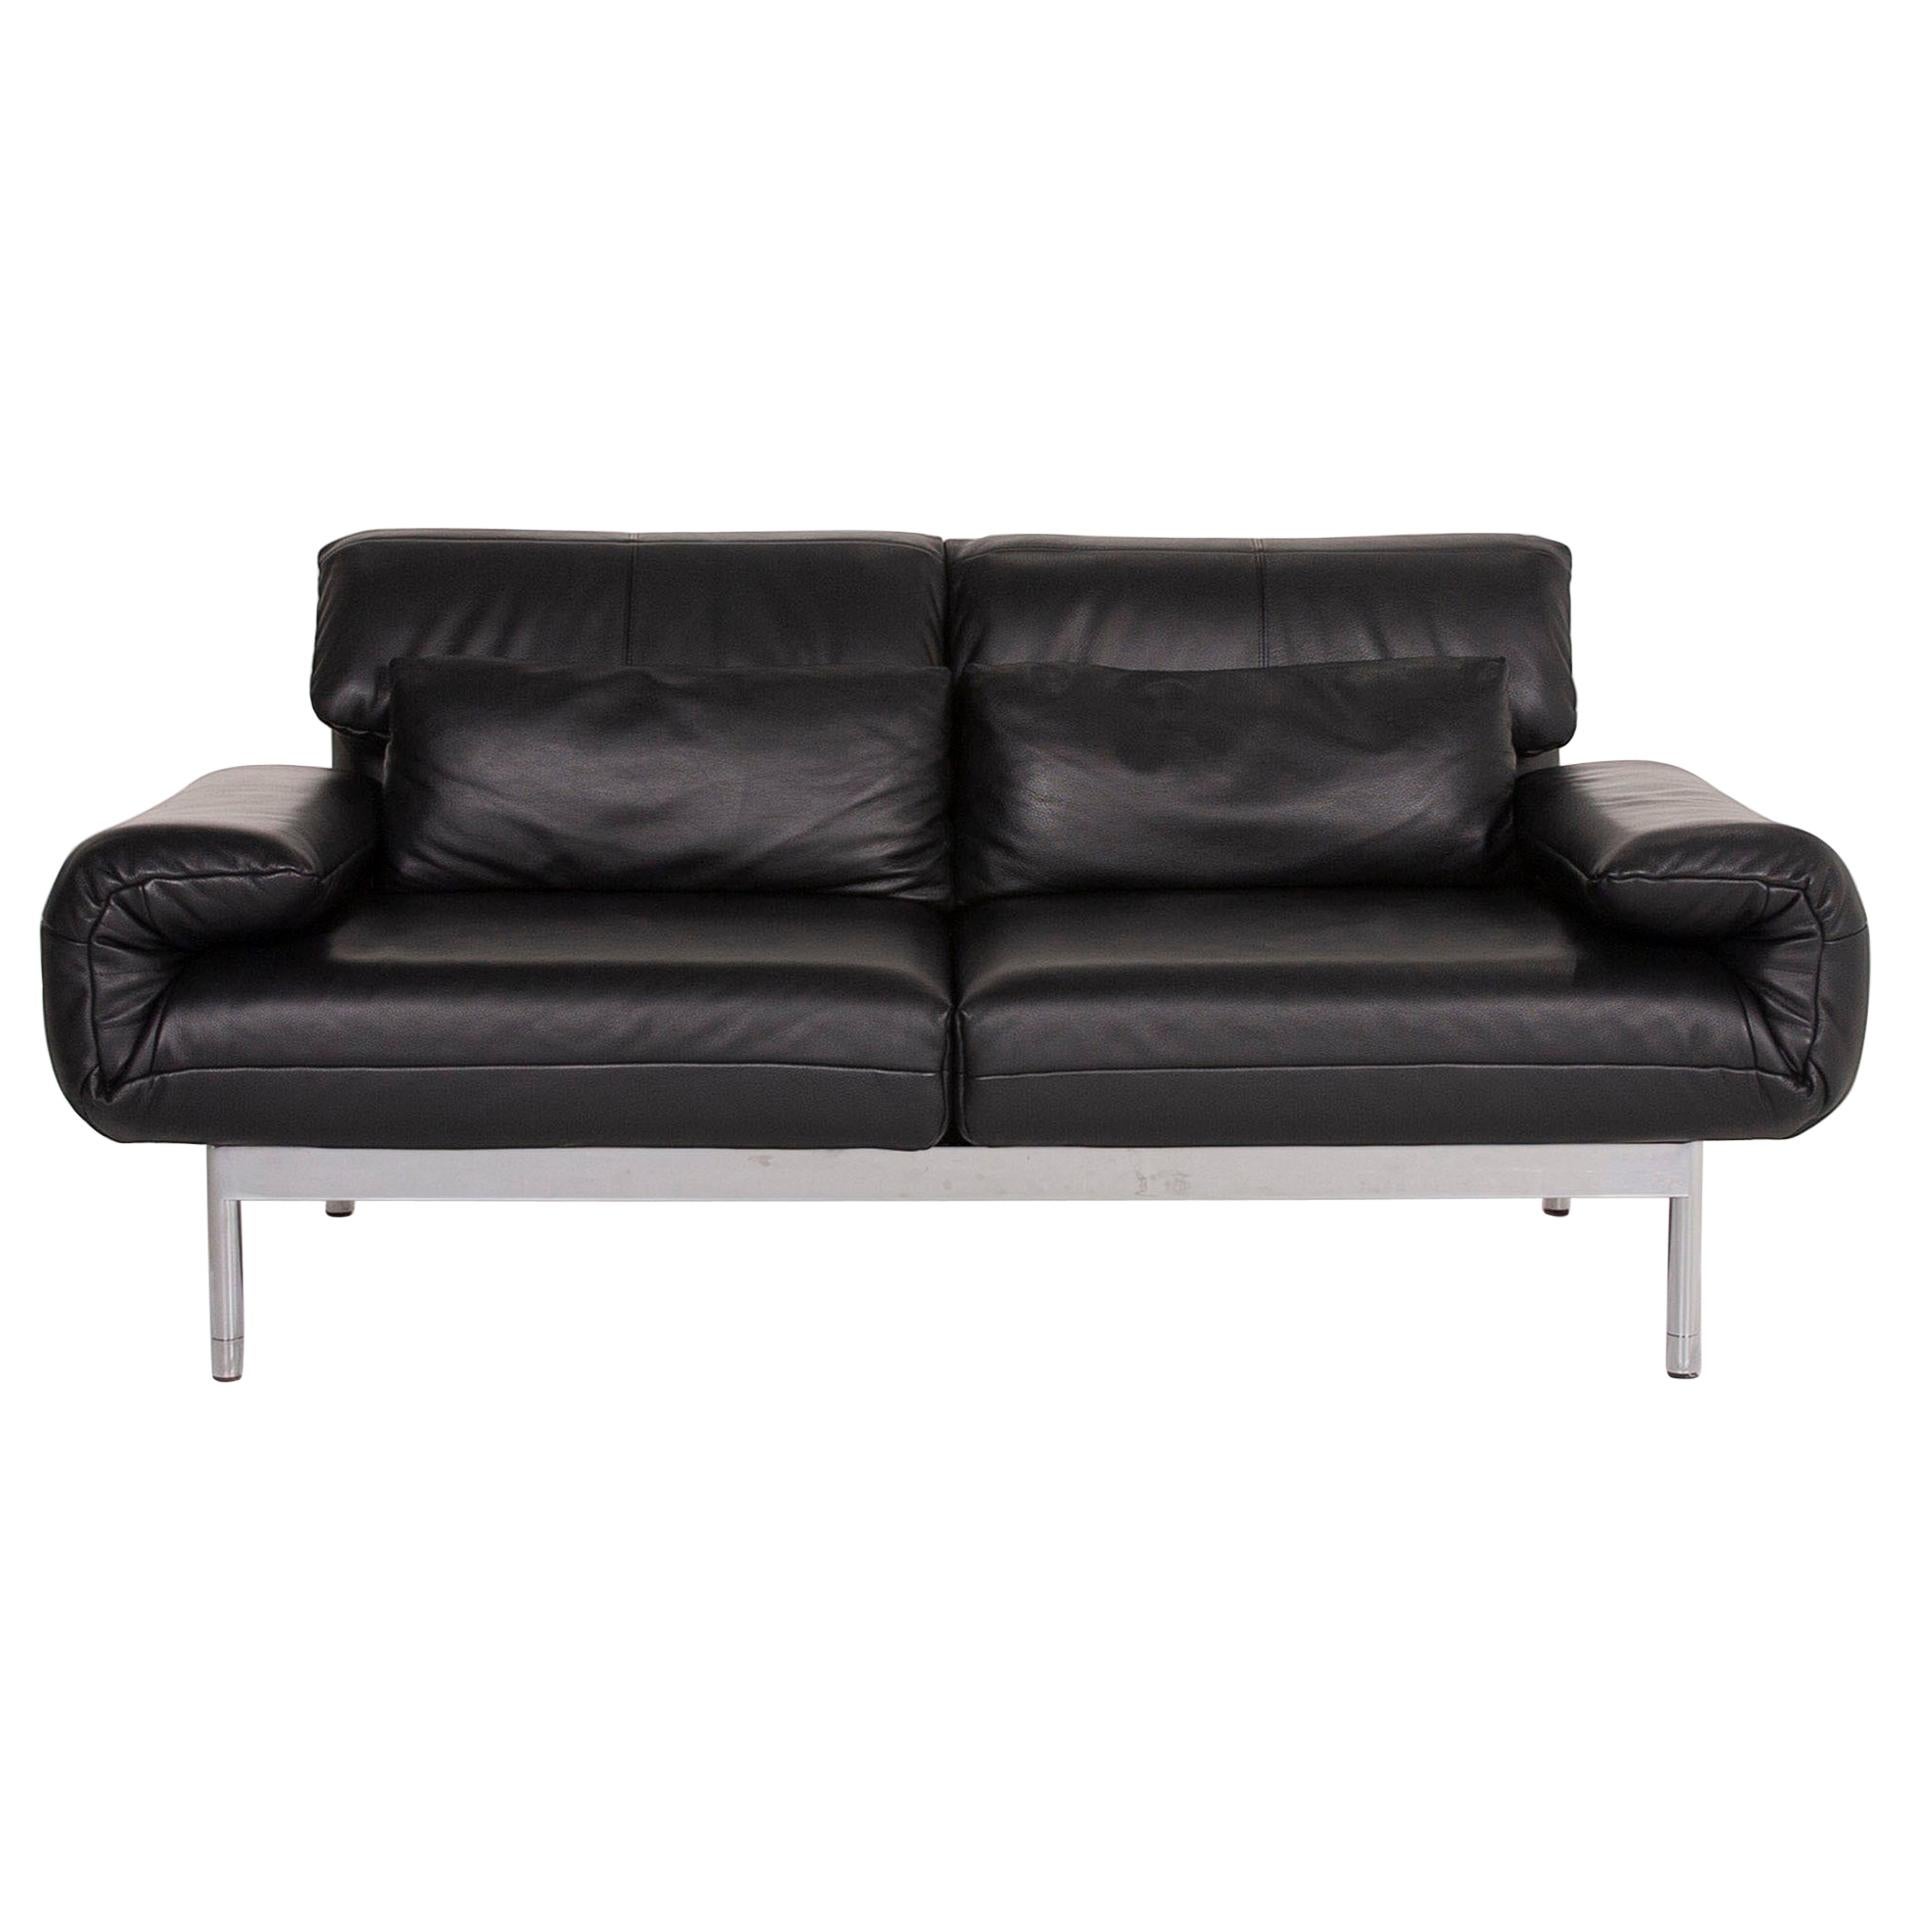 Rolf Benz Plura Leather Sofa Black Two-Seat Function Relax Function Couch For Sale